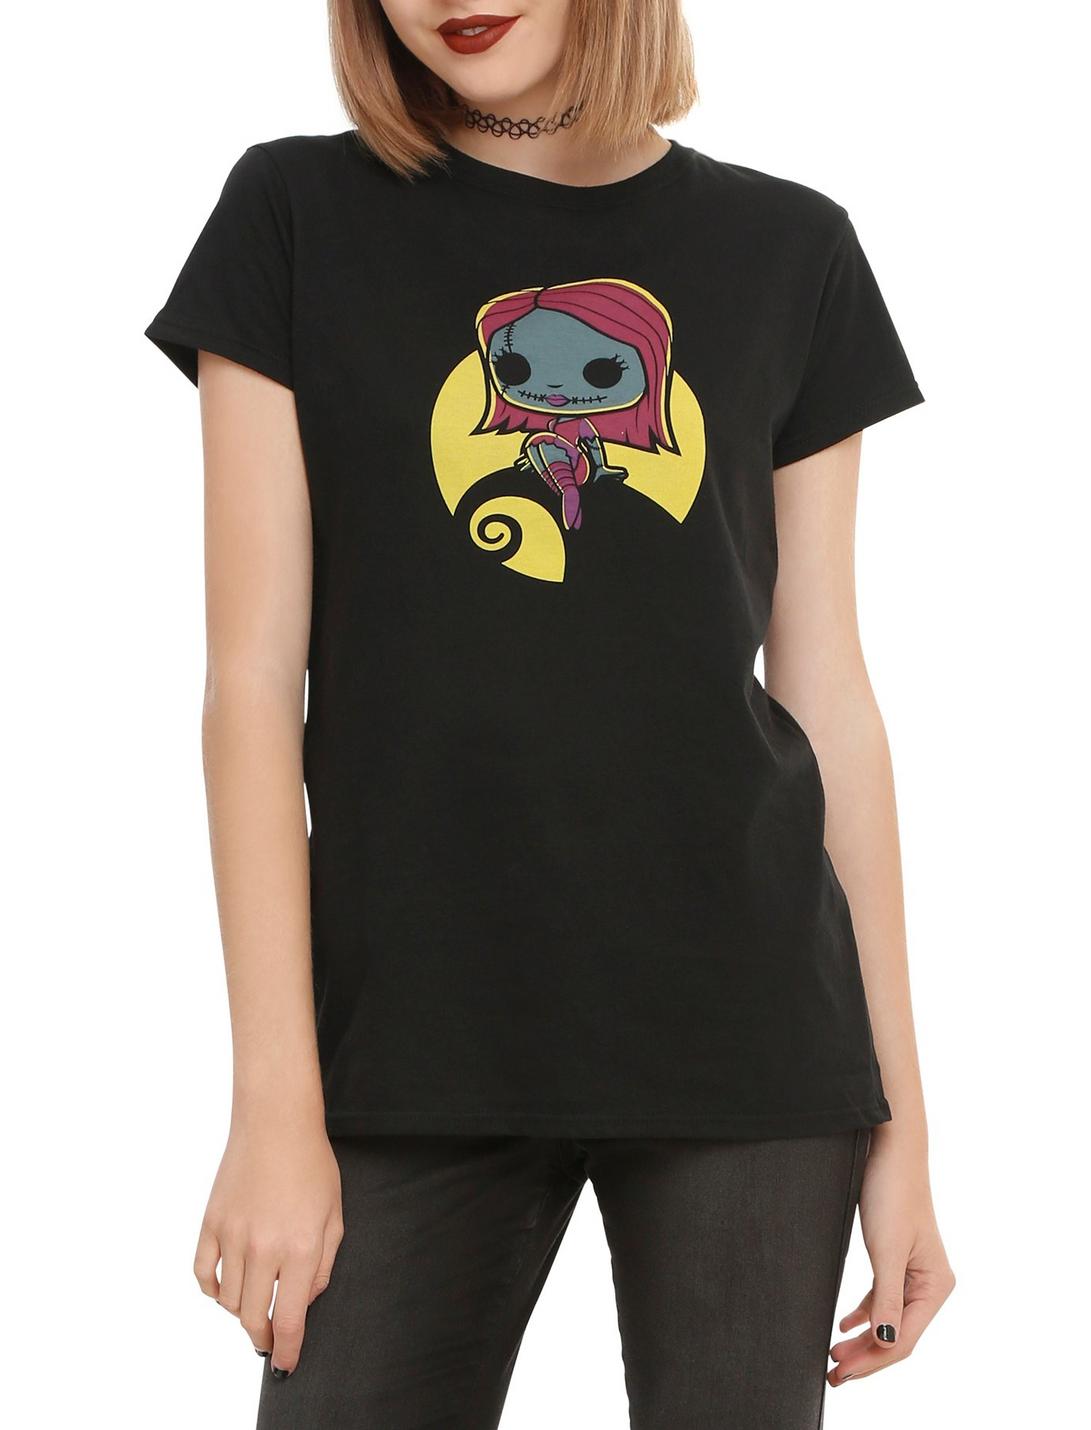 Funko The Nightmare Before Christmas Pop! Sally Girls T-Shirt Hot Topic Exclusive, BLACK, hi-res